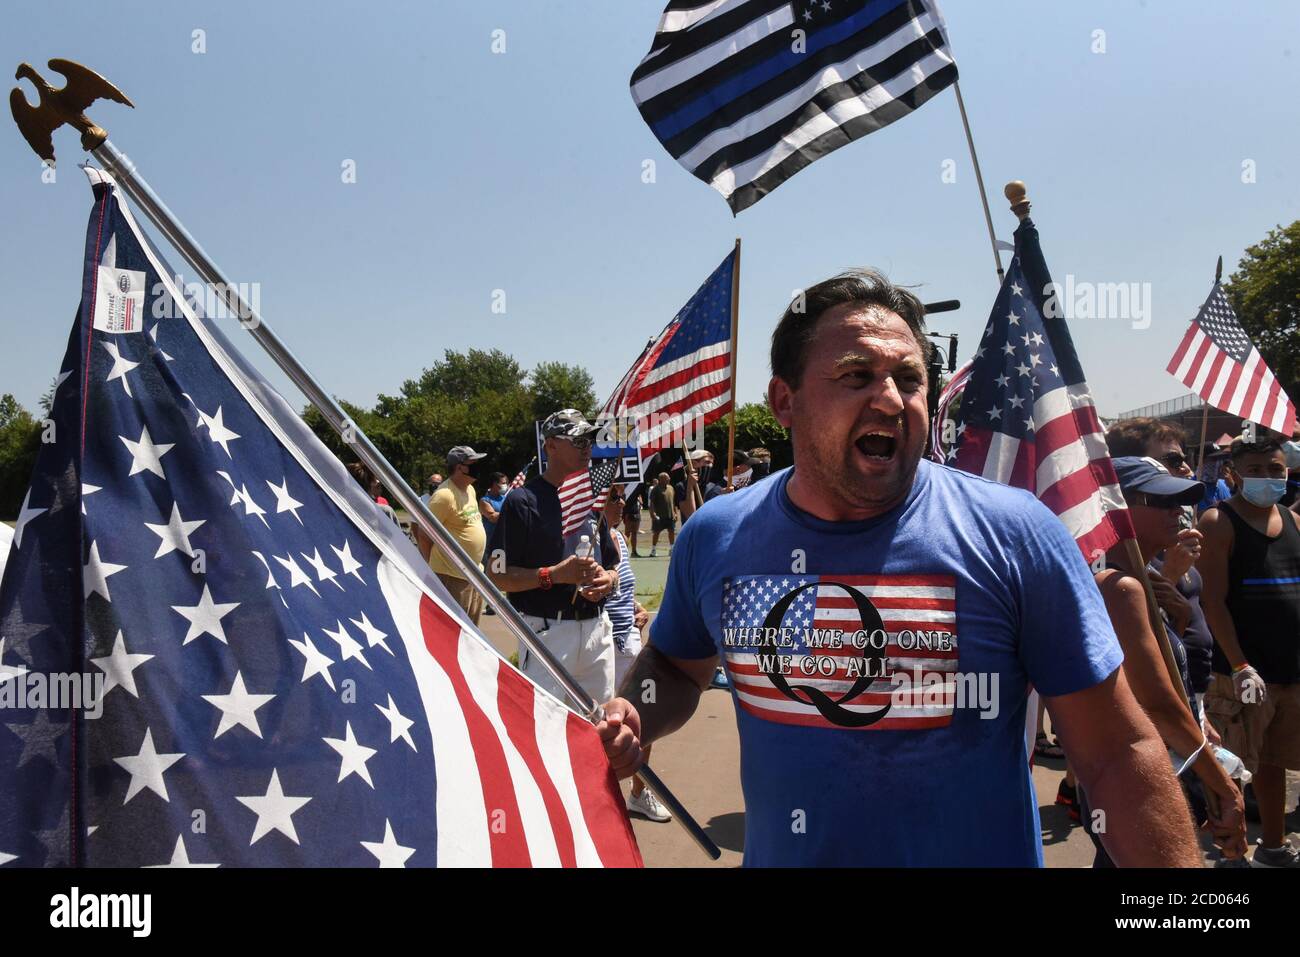 A person wearing a t-shirt supportive of QAnon participates in a 'Back the Blue' rally in the Brooklyn borough of New York City, New York, U.S. August 9, 2020. Picture taken August 9, 2020. REUTERS/Stephanie Keith Stock Photo